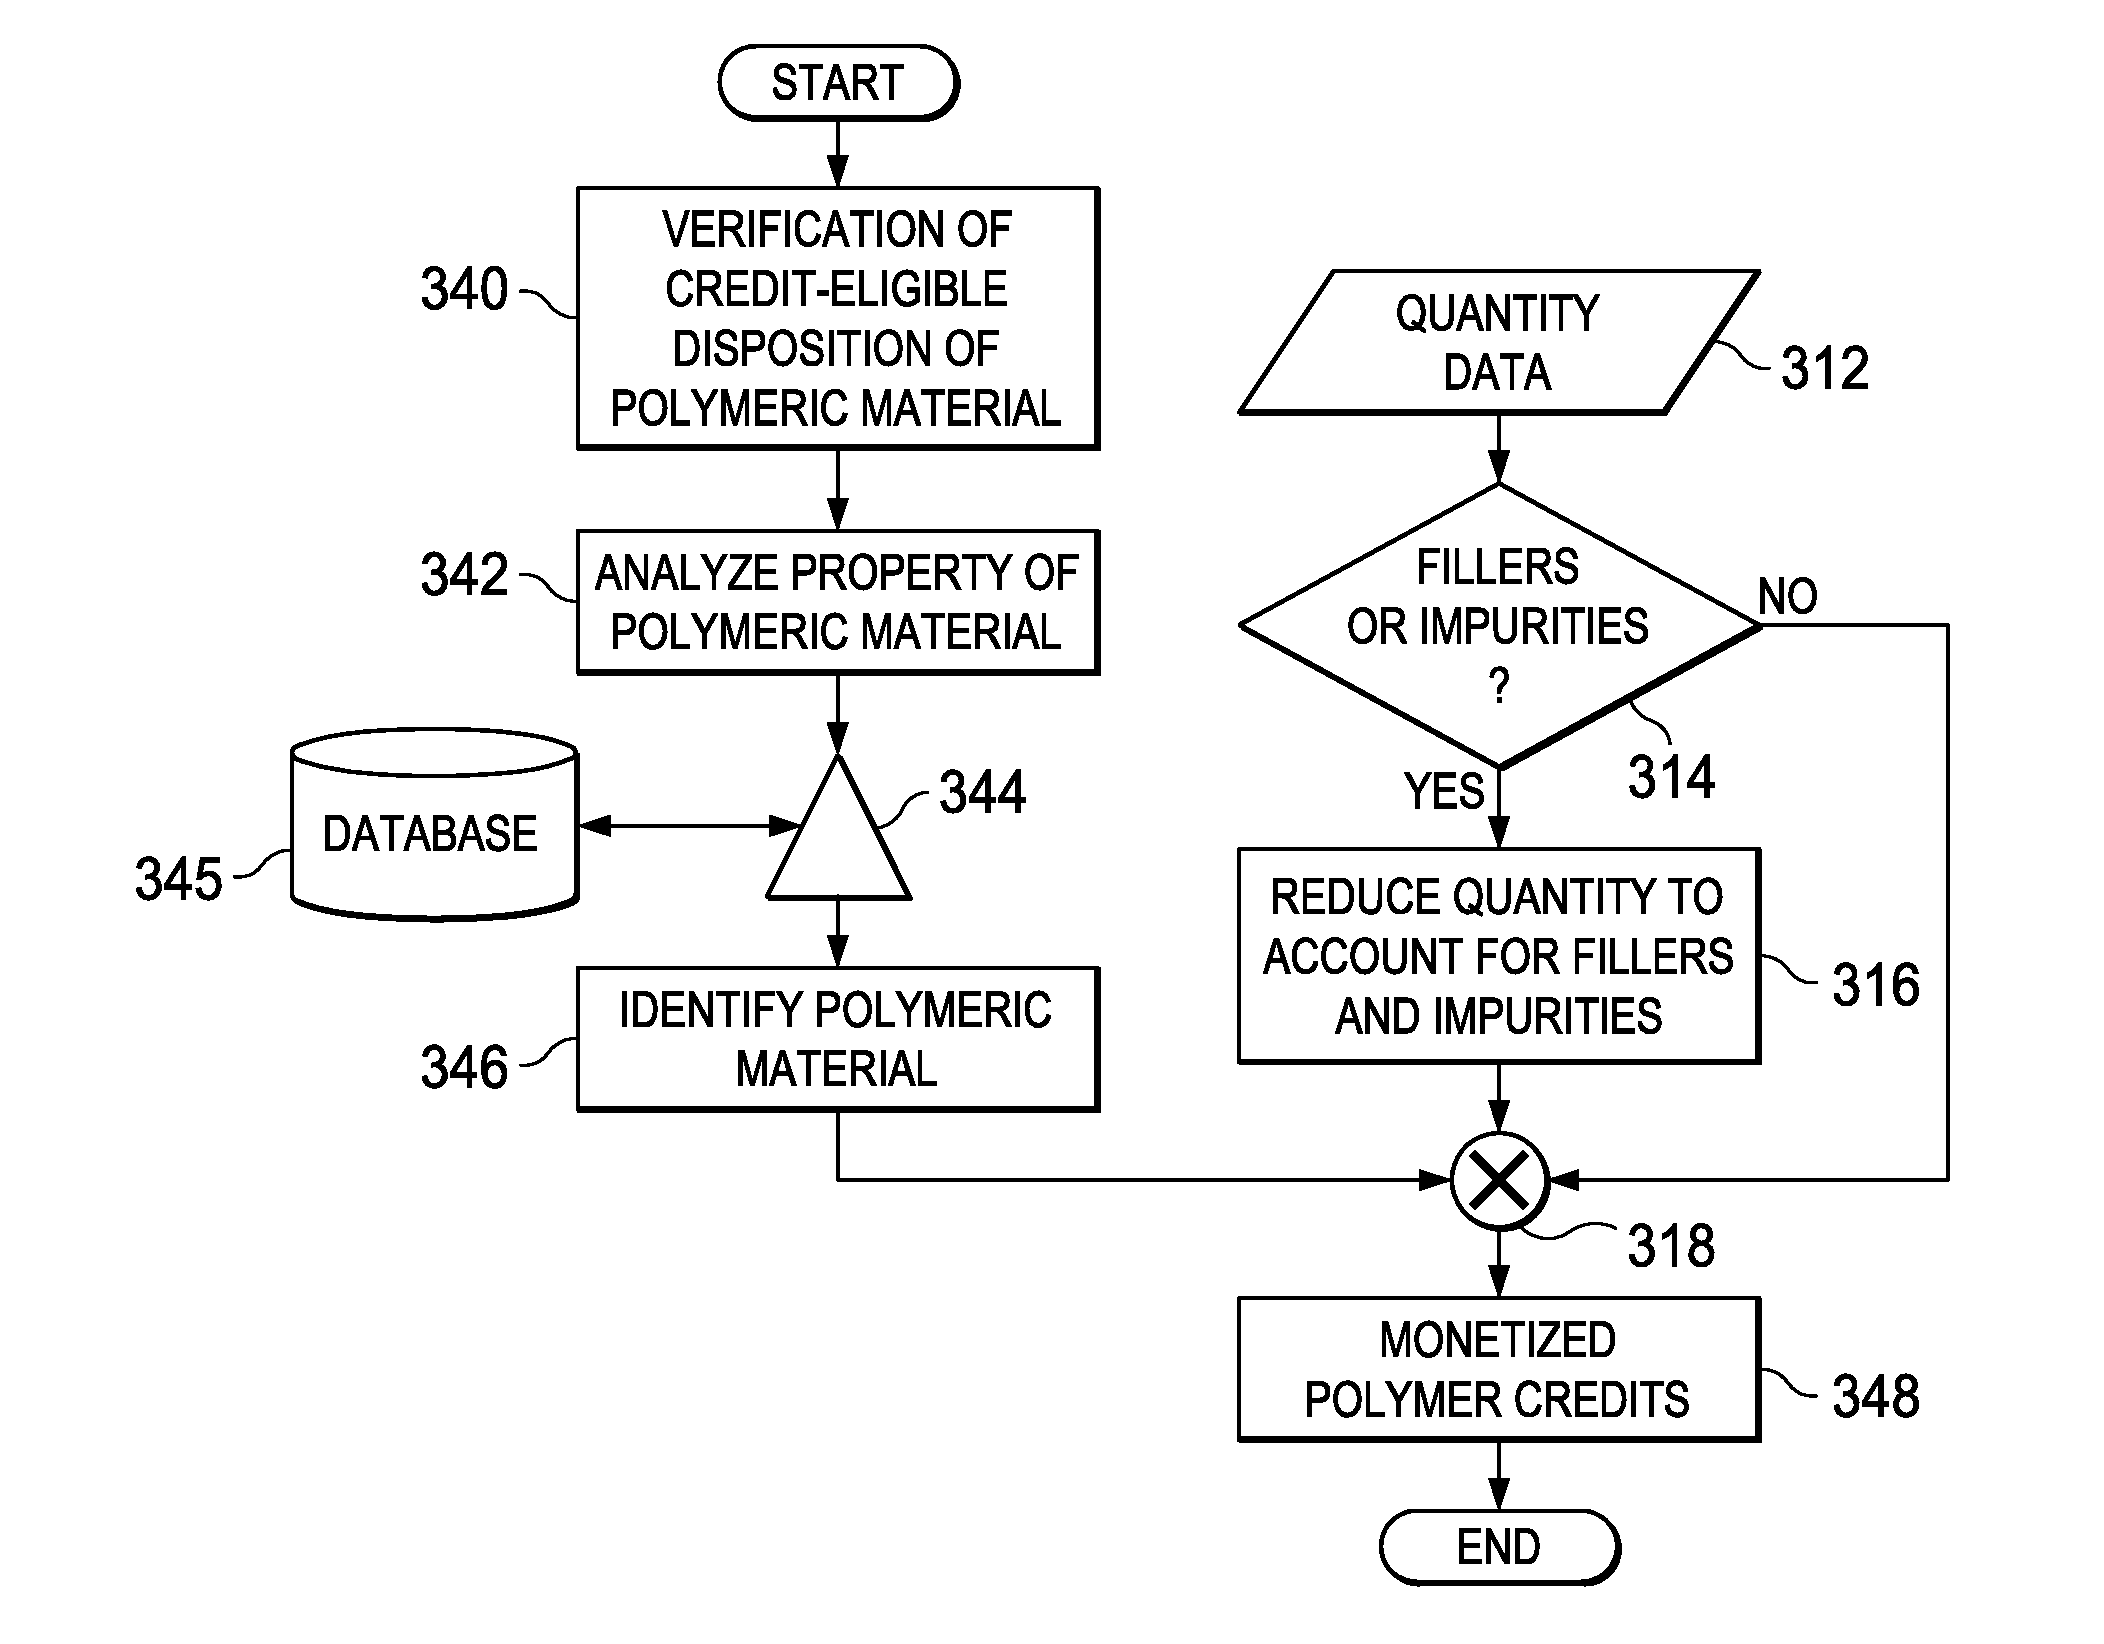 System and method for monetizing and trading energy or environmental credits from polymeric materials